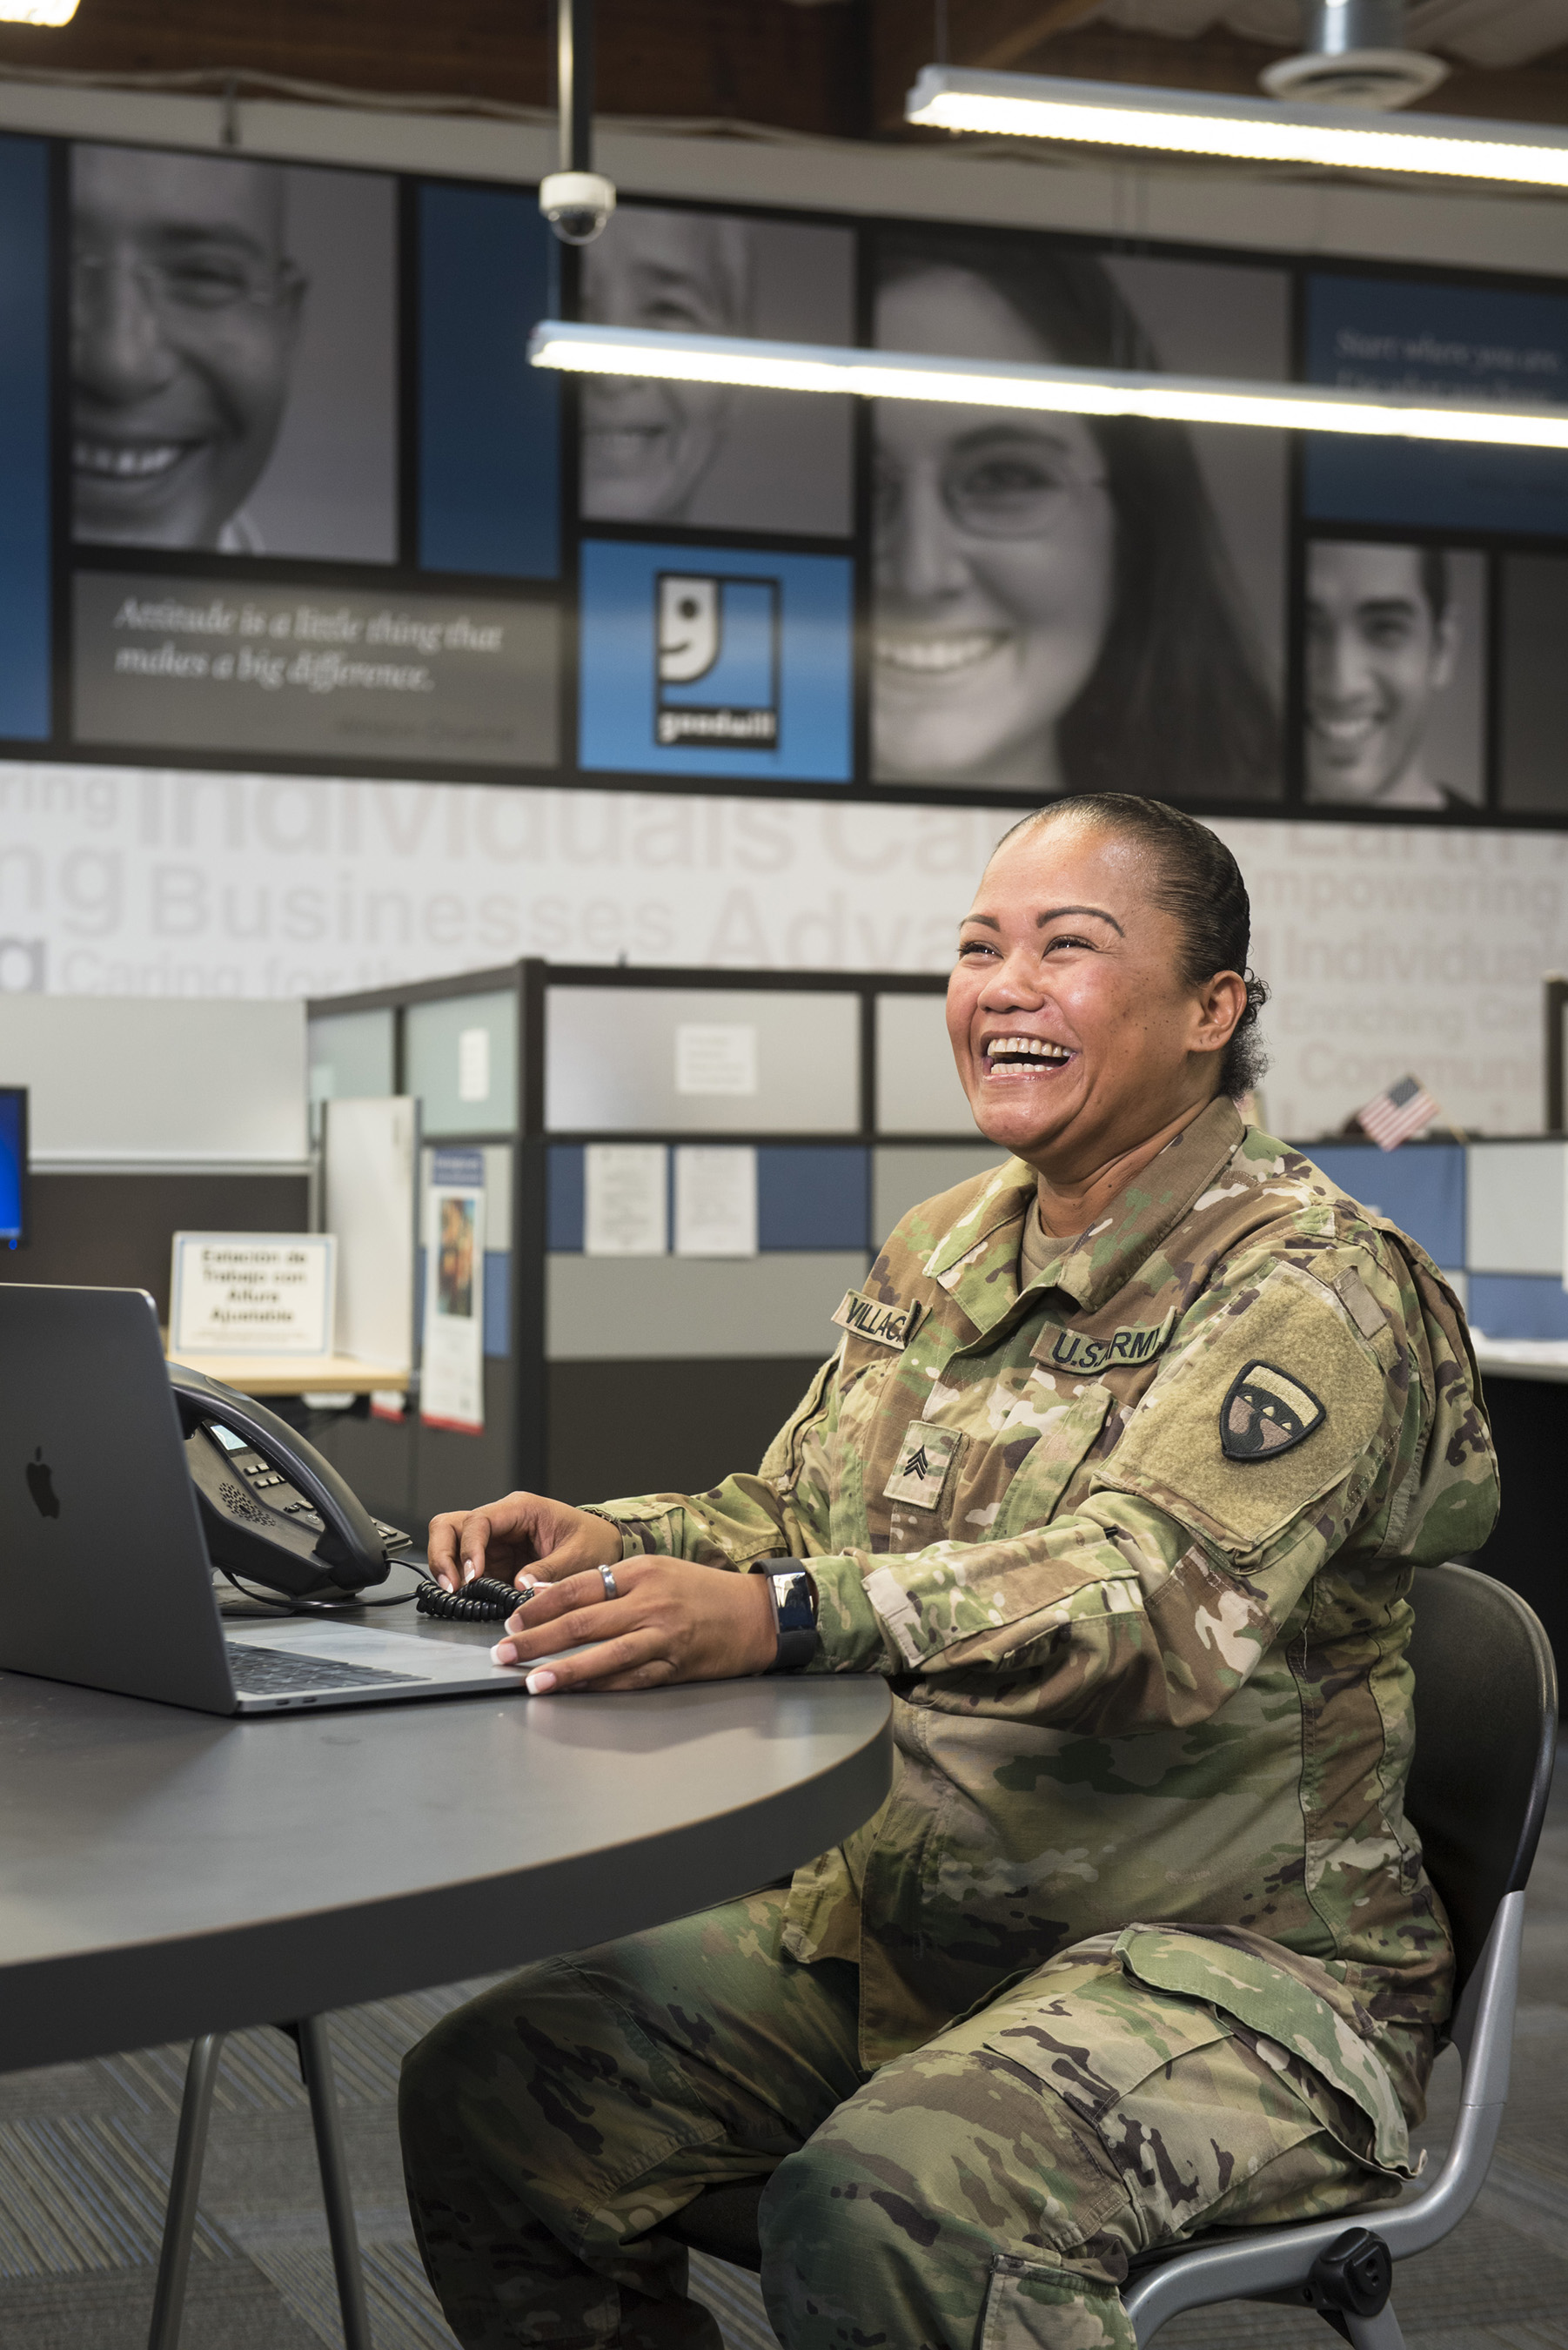 Did you know that women veterans face added challenges to finding gainful employment following military service? You can make a difference by donating or hiring.